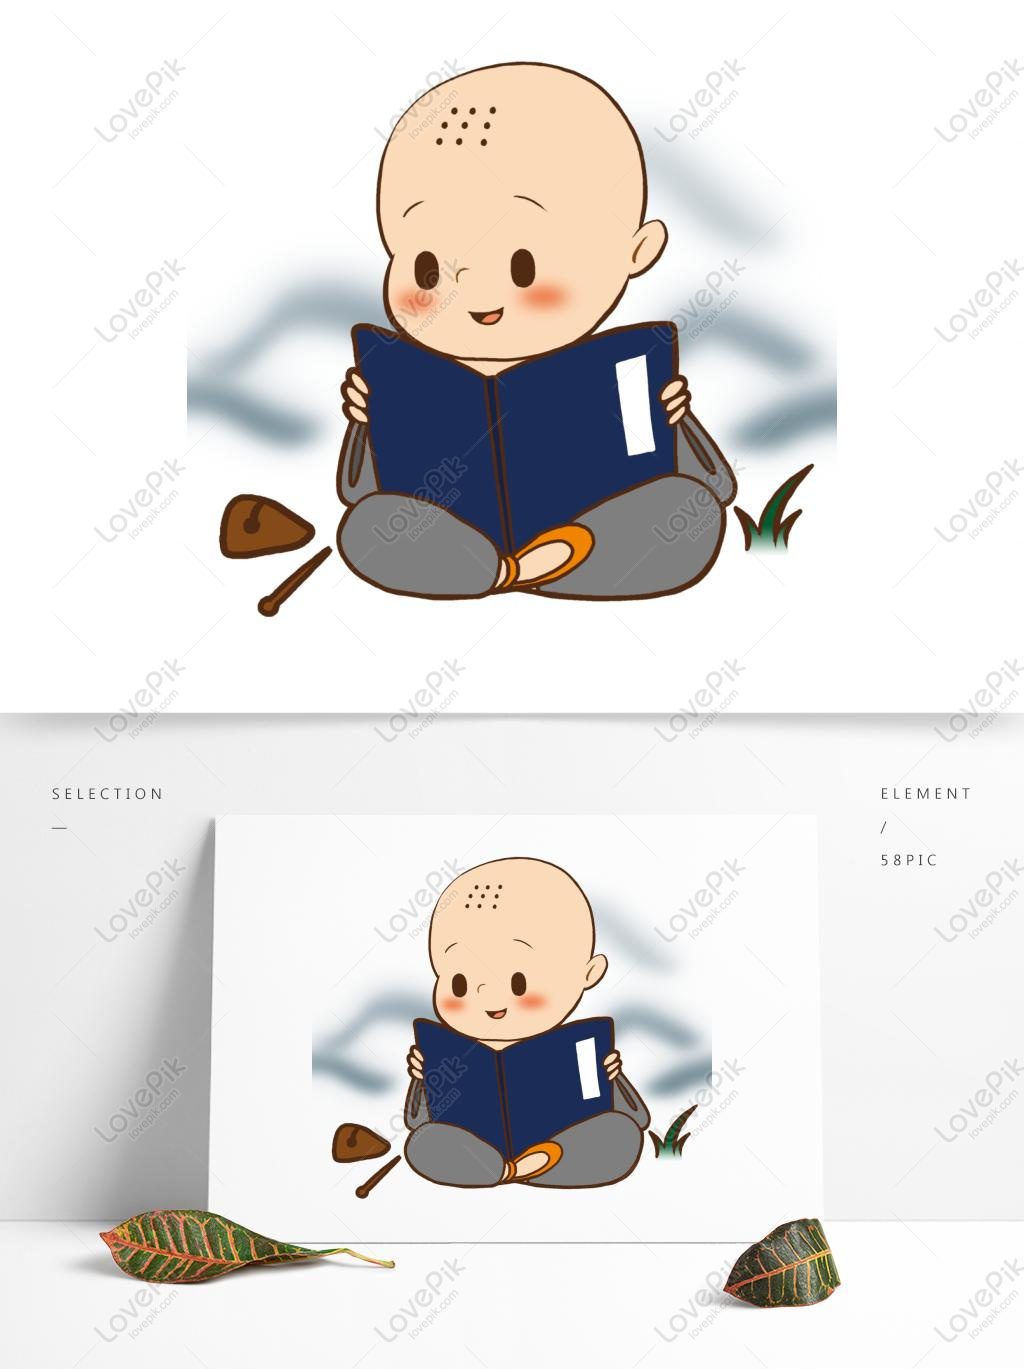 Gray Costume Cute Cartoon Little Monk Mountain Middle School Rea Free PNG  PSD images free download_1369 × 1024 px - Lovepik